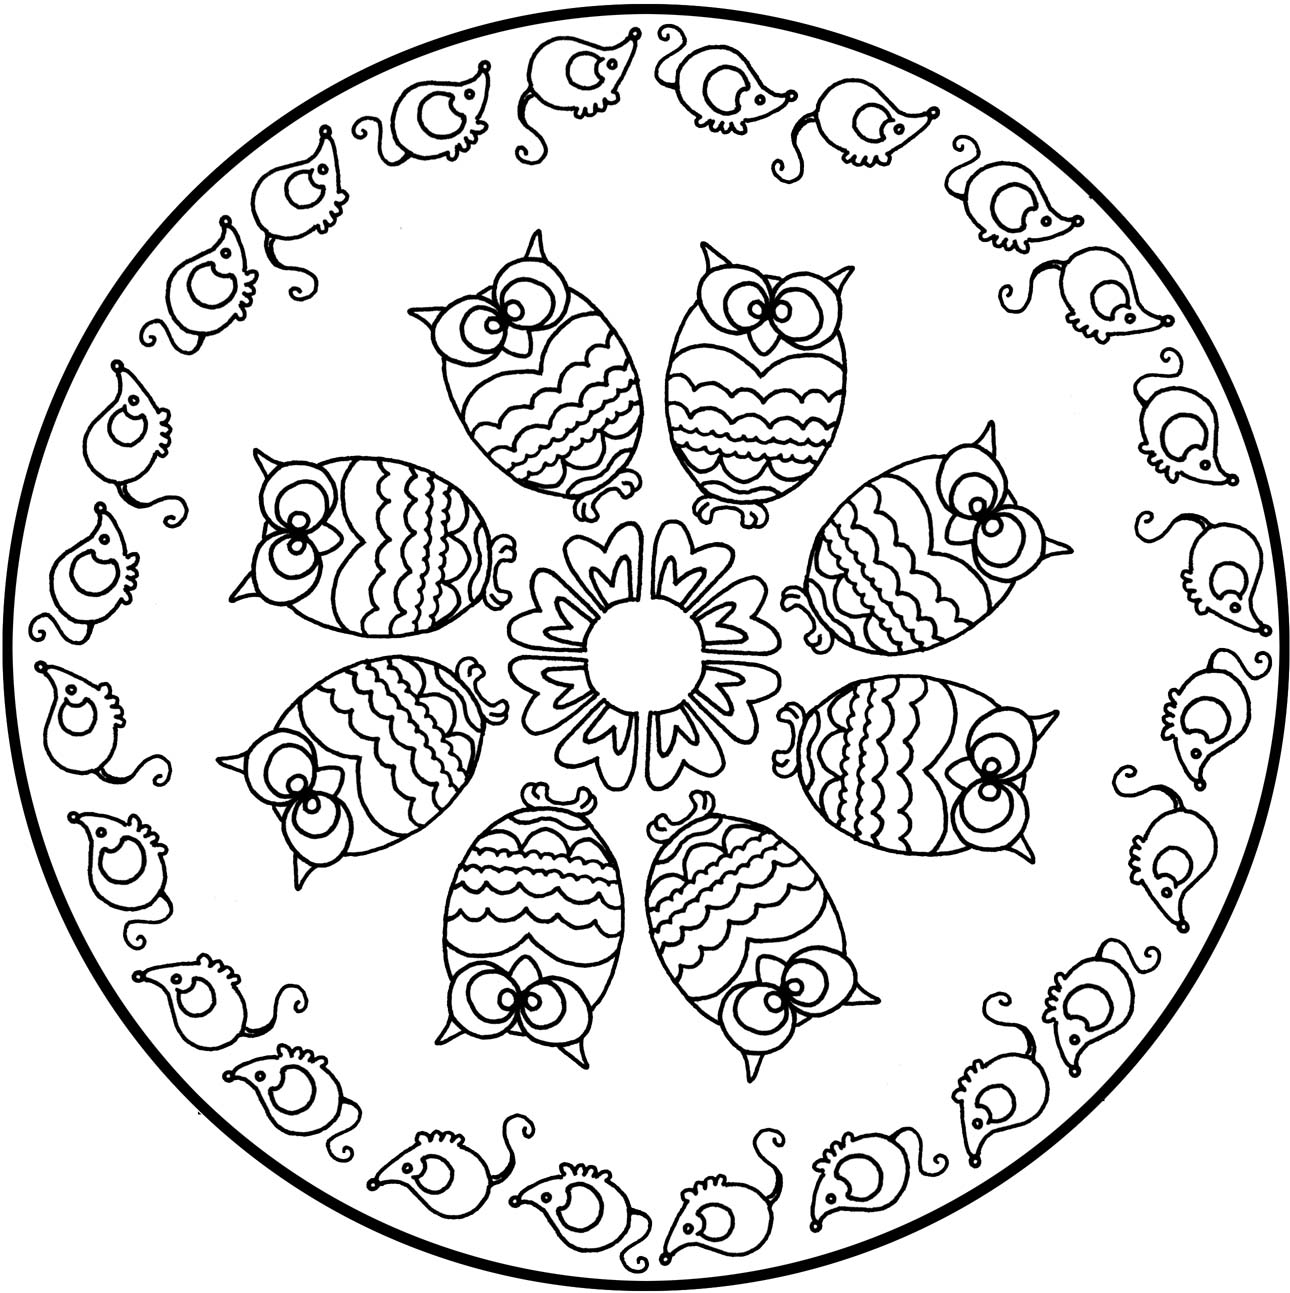 Mandalas coloring page to print and color